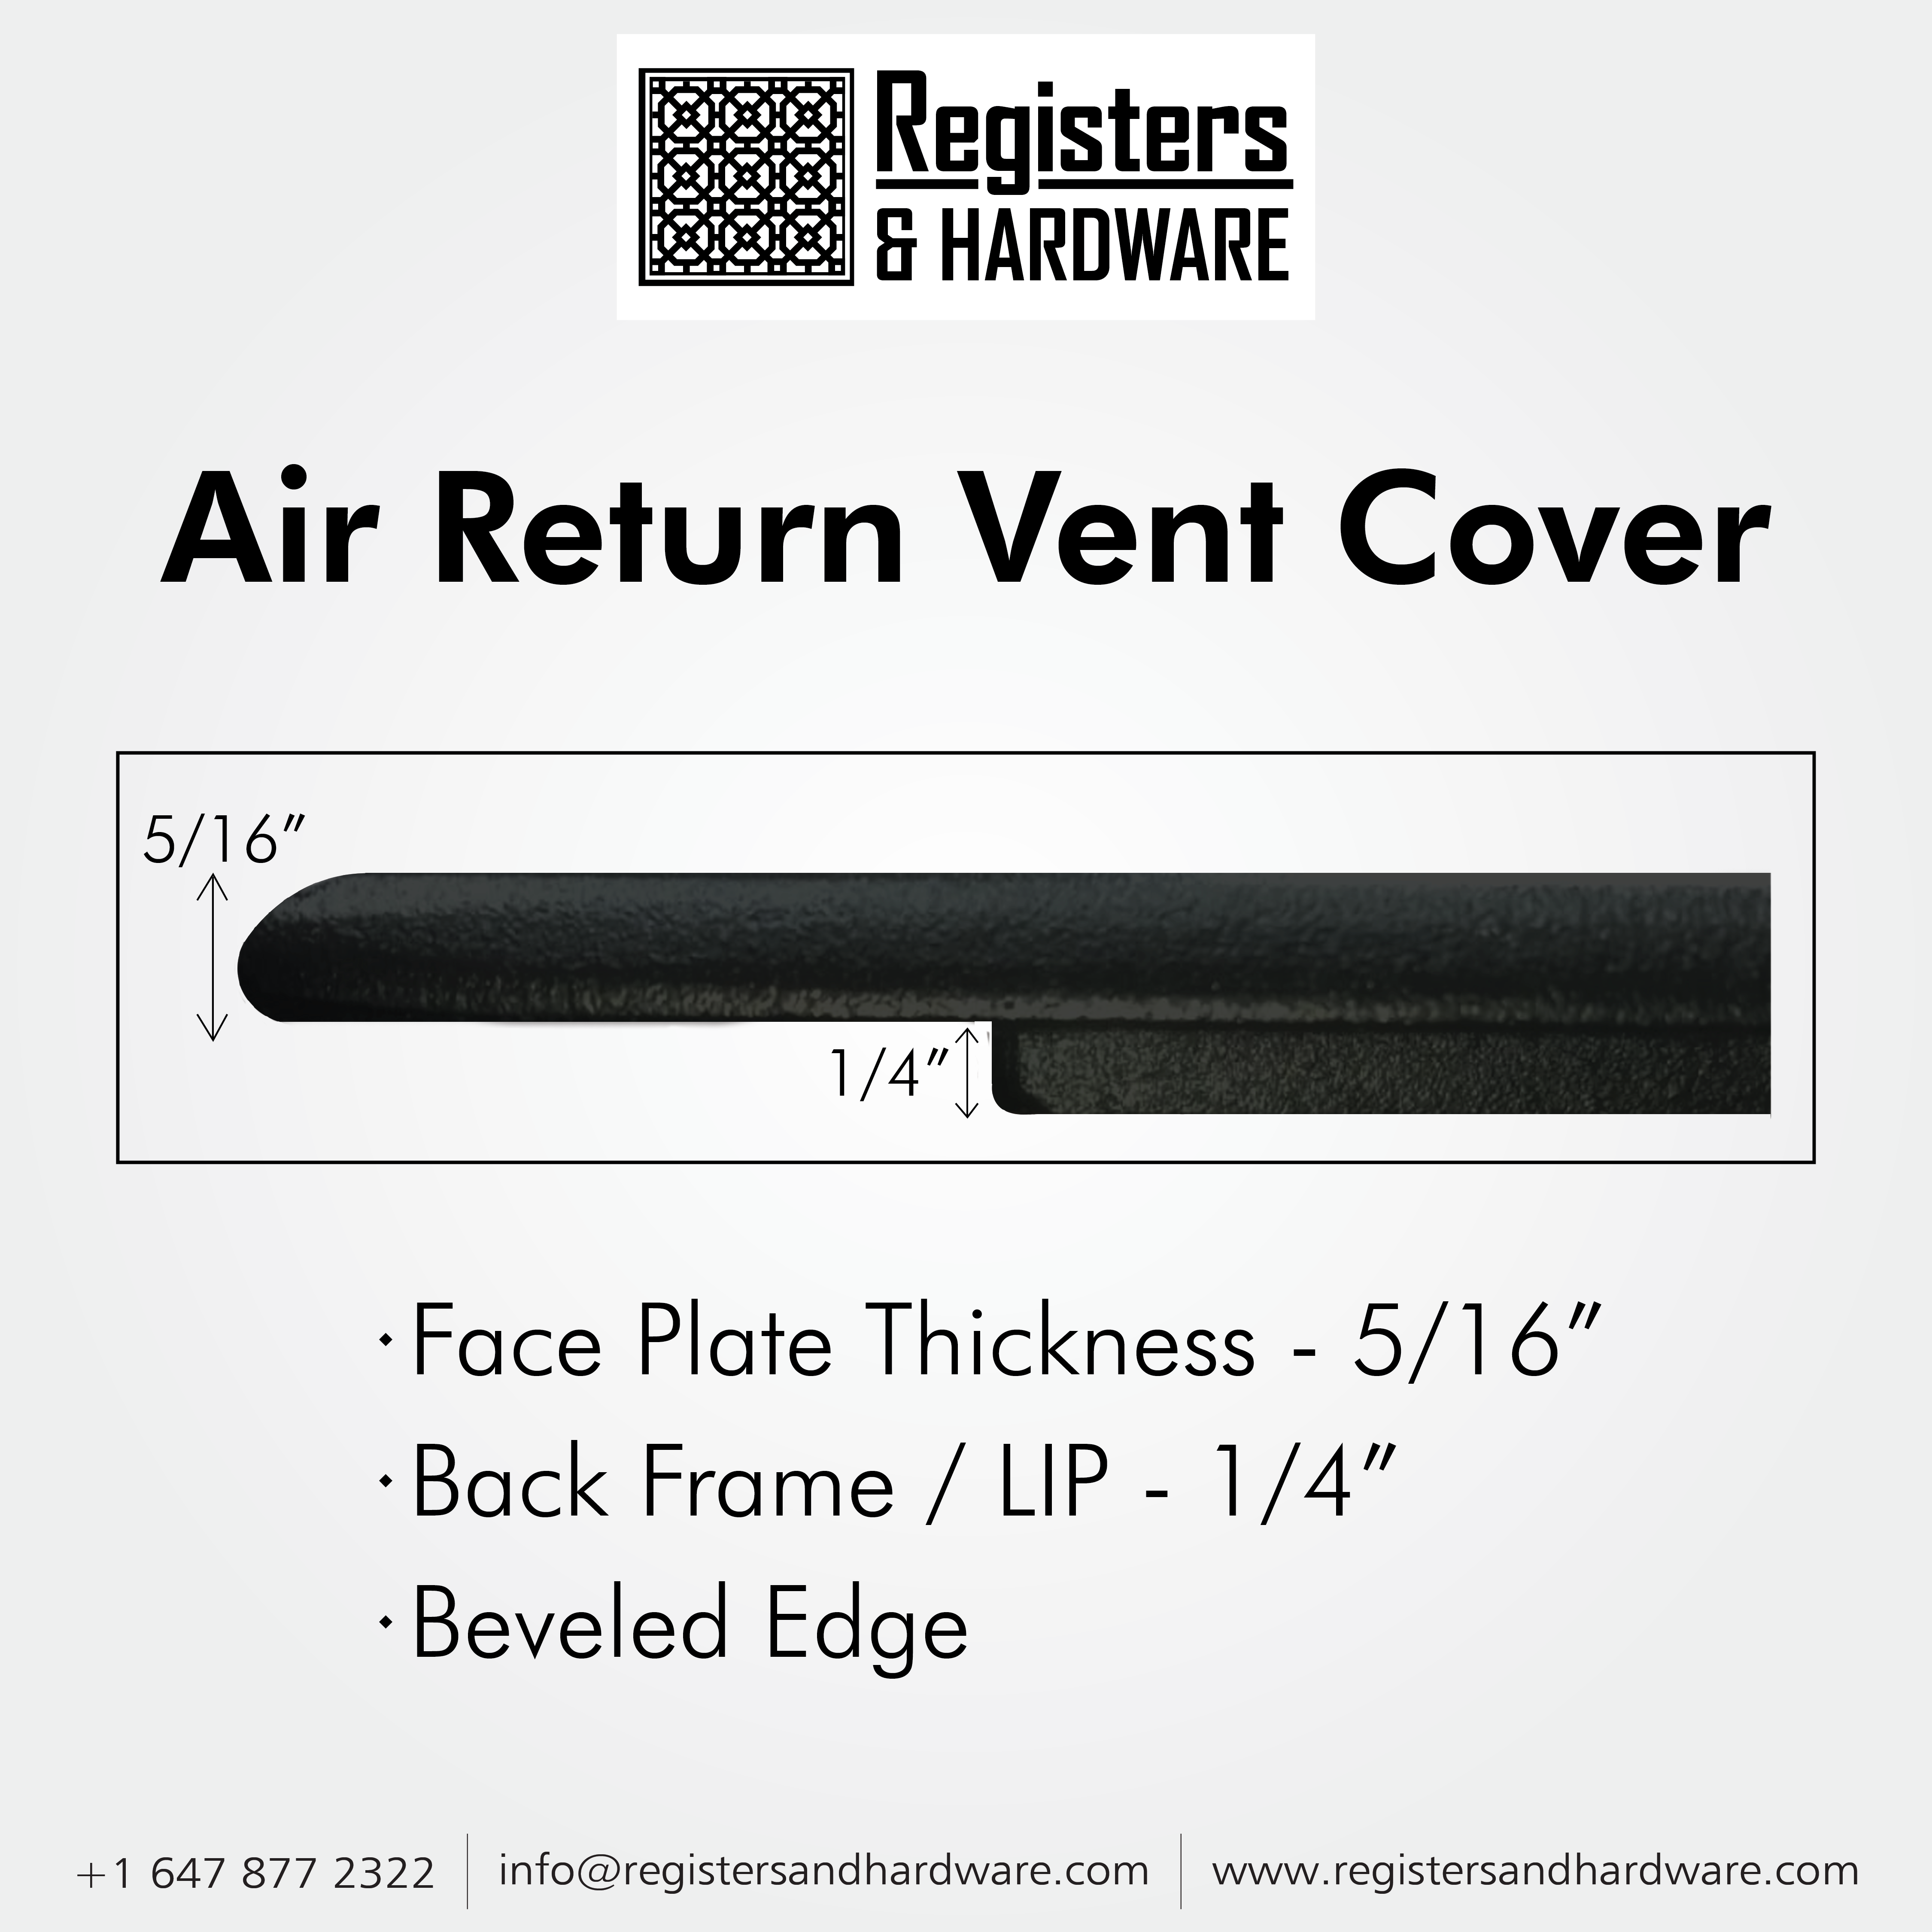 Achtek AIR RETURN 8"x24" Duct Opening (Overall Size 10"x26") | Heavy Cast Aluminum Air Grille HVAC Duct || Powder Coated